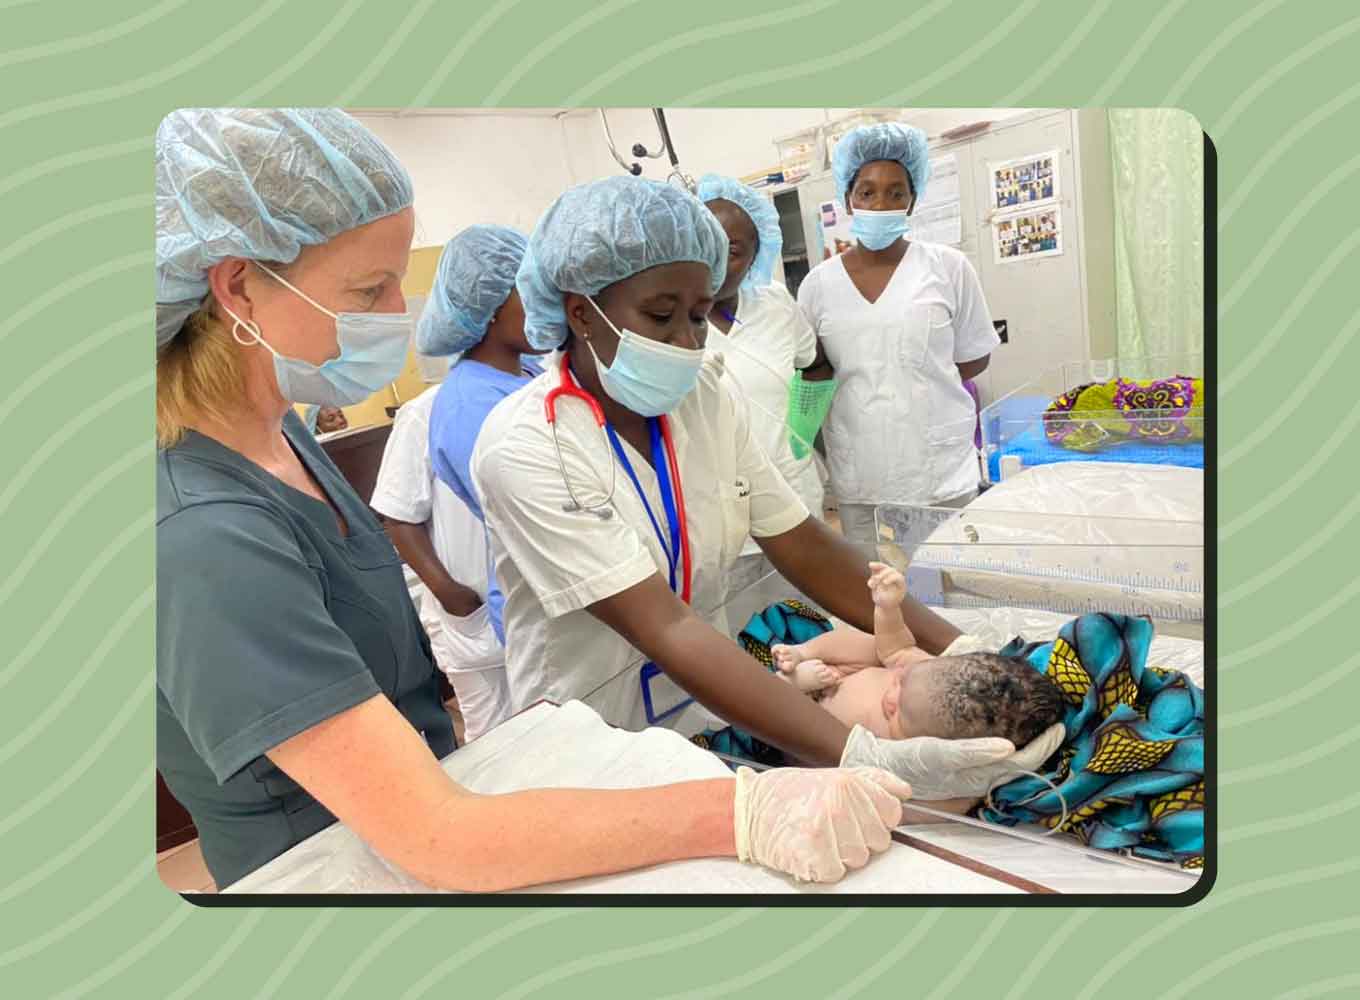 A white nurse stands beside a Sierra Leonean nursing student as she cares for a baby in a hospital.